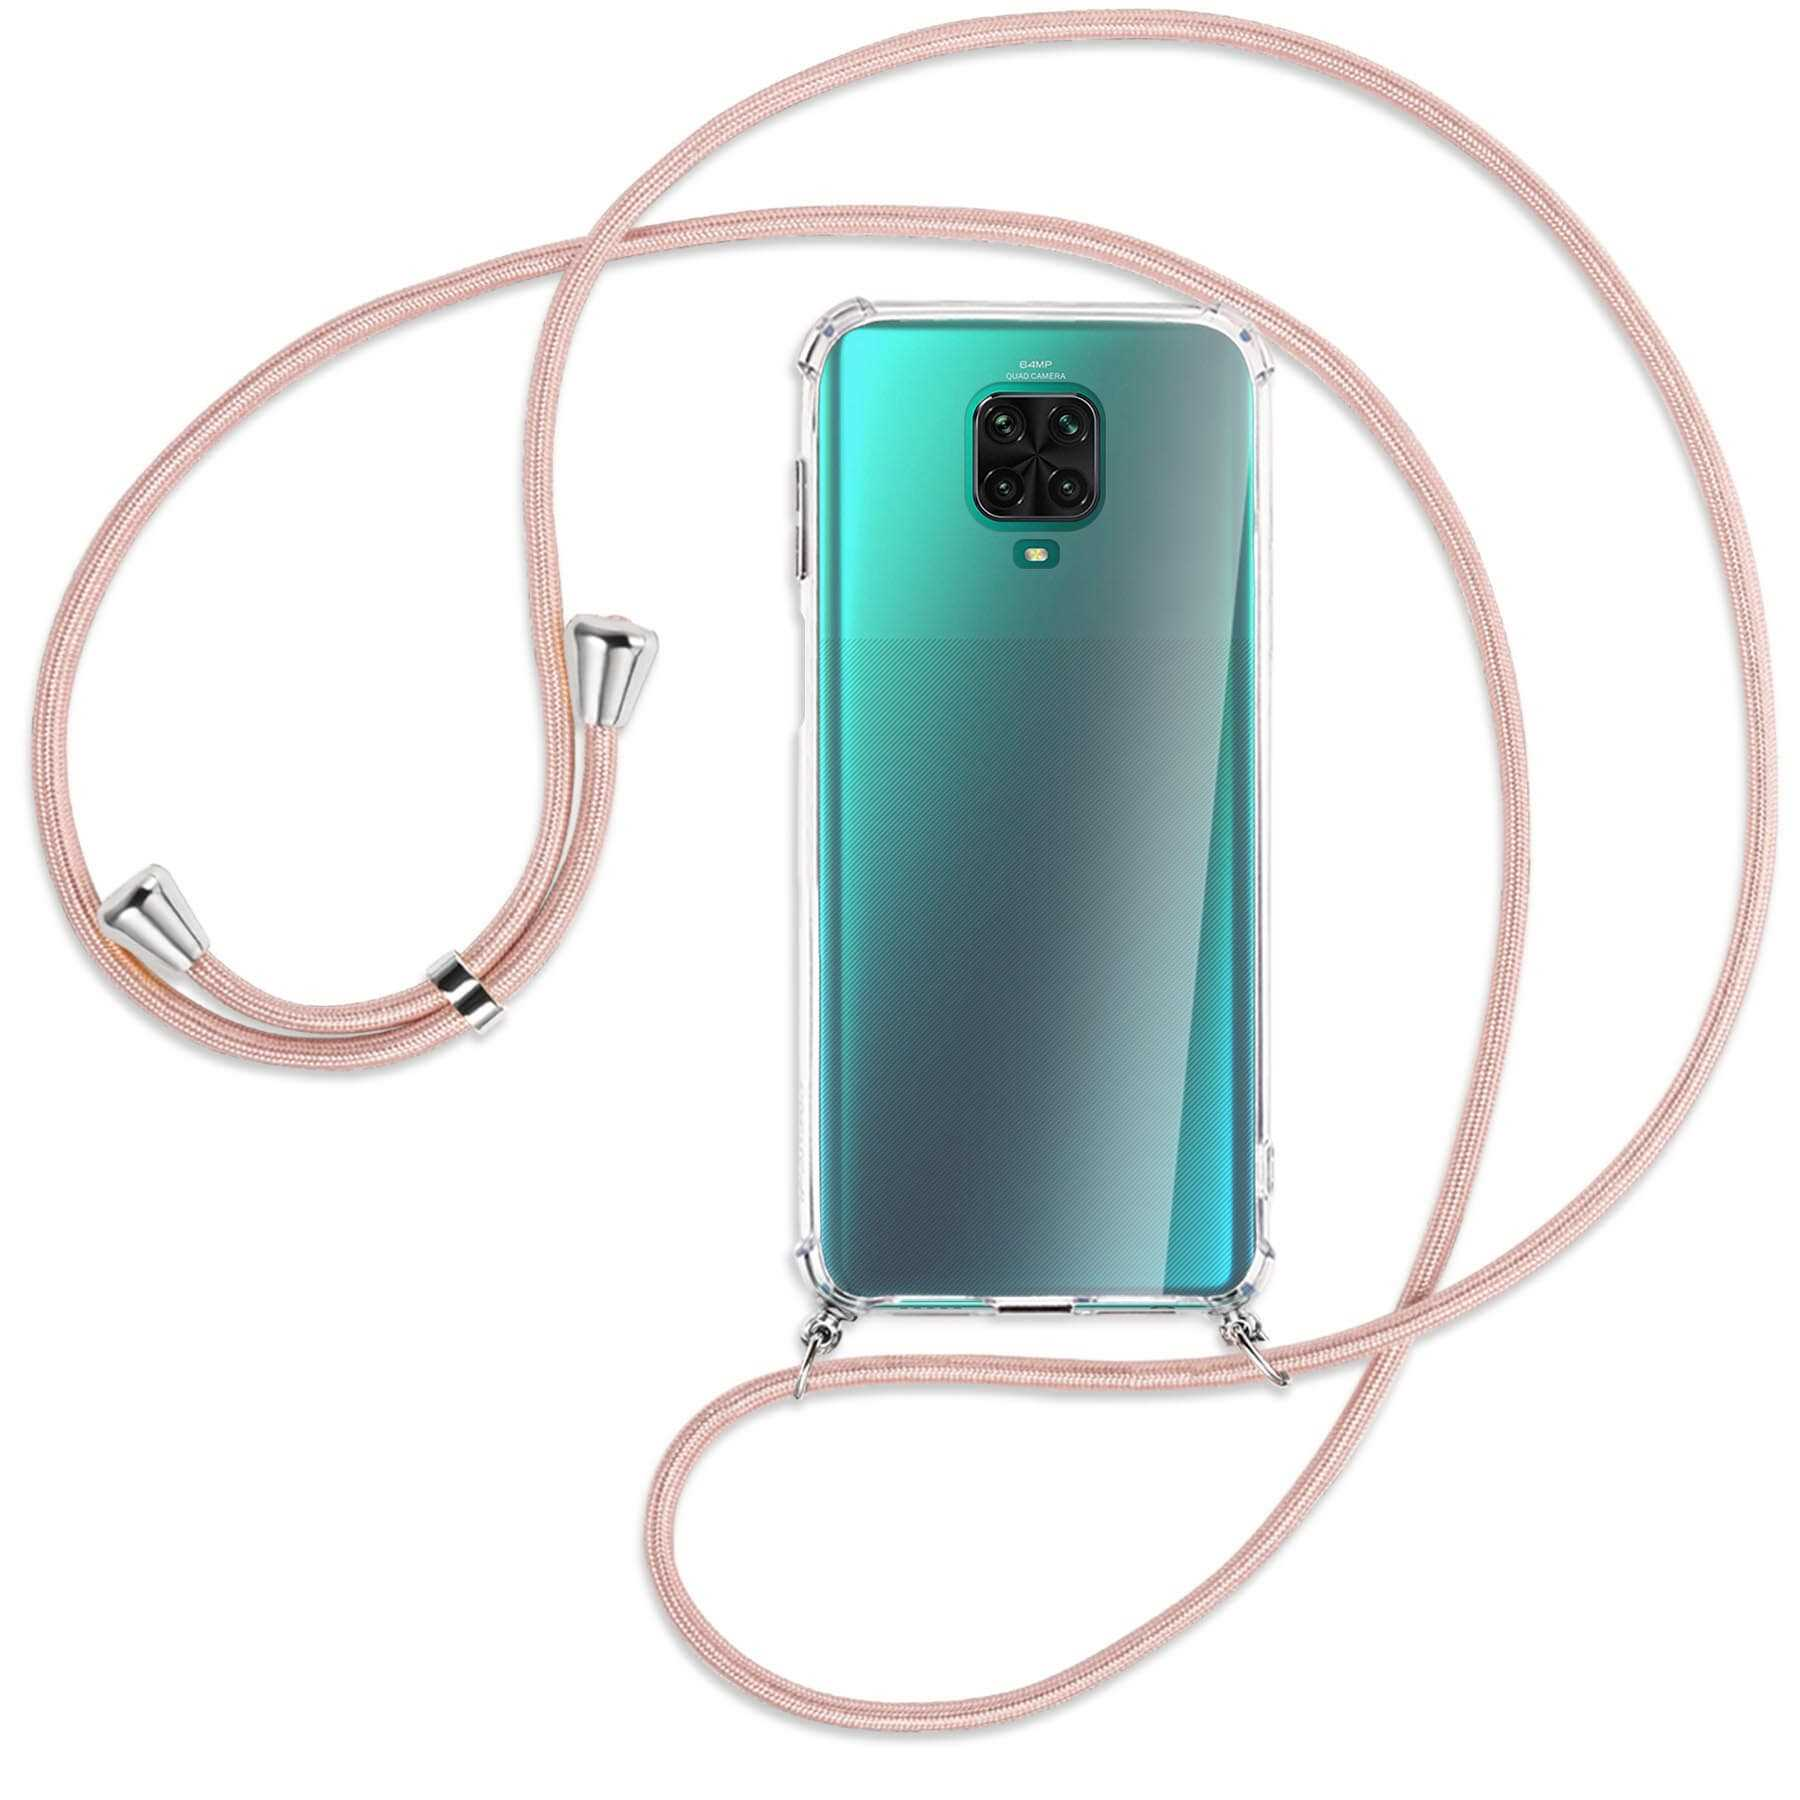 9S, MTB mit Backcover, Note Redmi Pro, Rosegold Umhänge-Hülle / Silber ENERGY Redmi 9 Kordel, Note MORE Xiaomi,